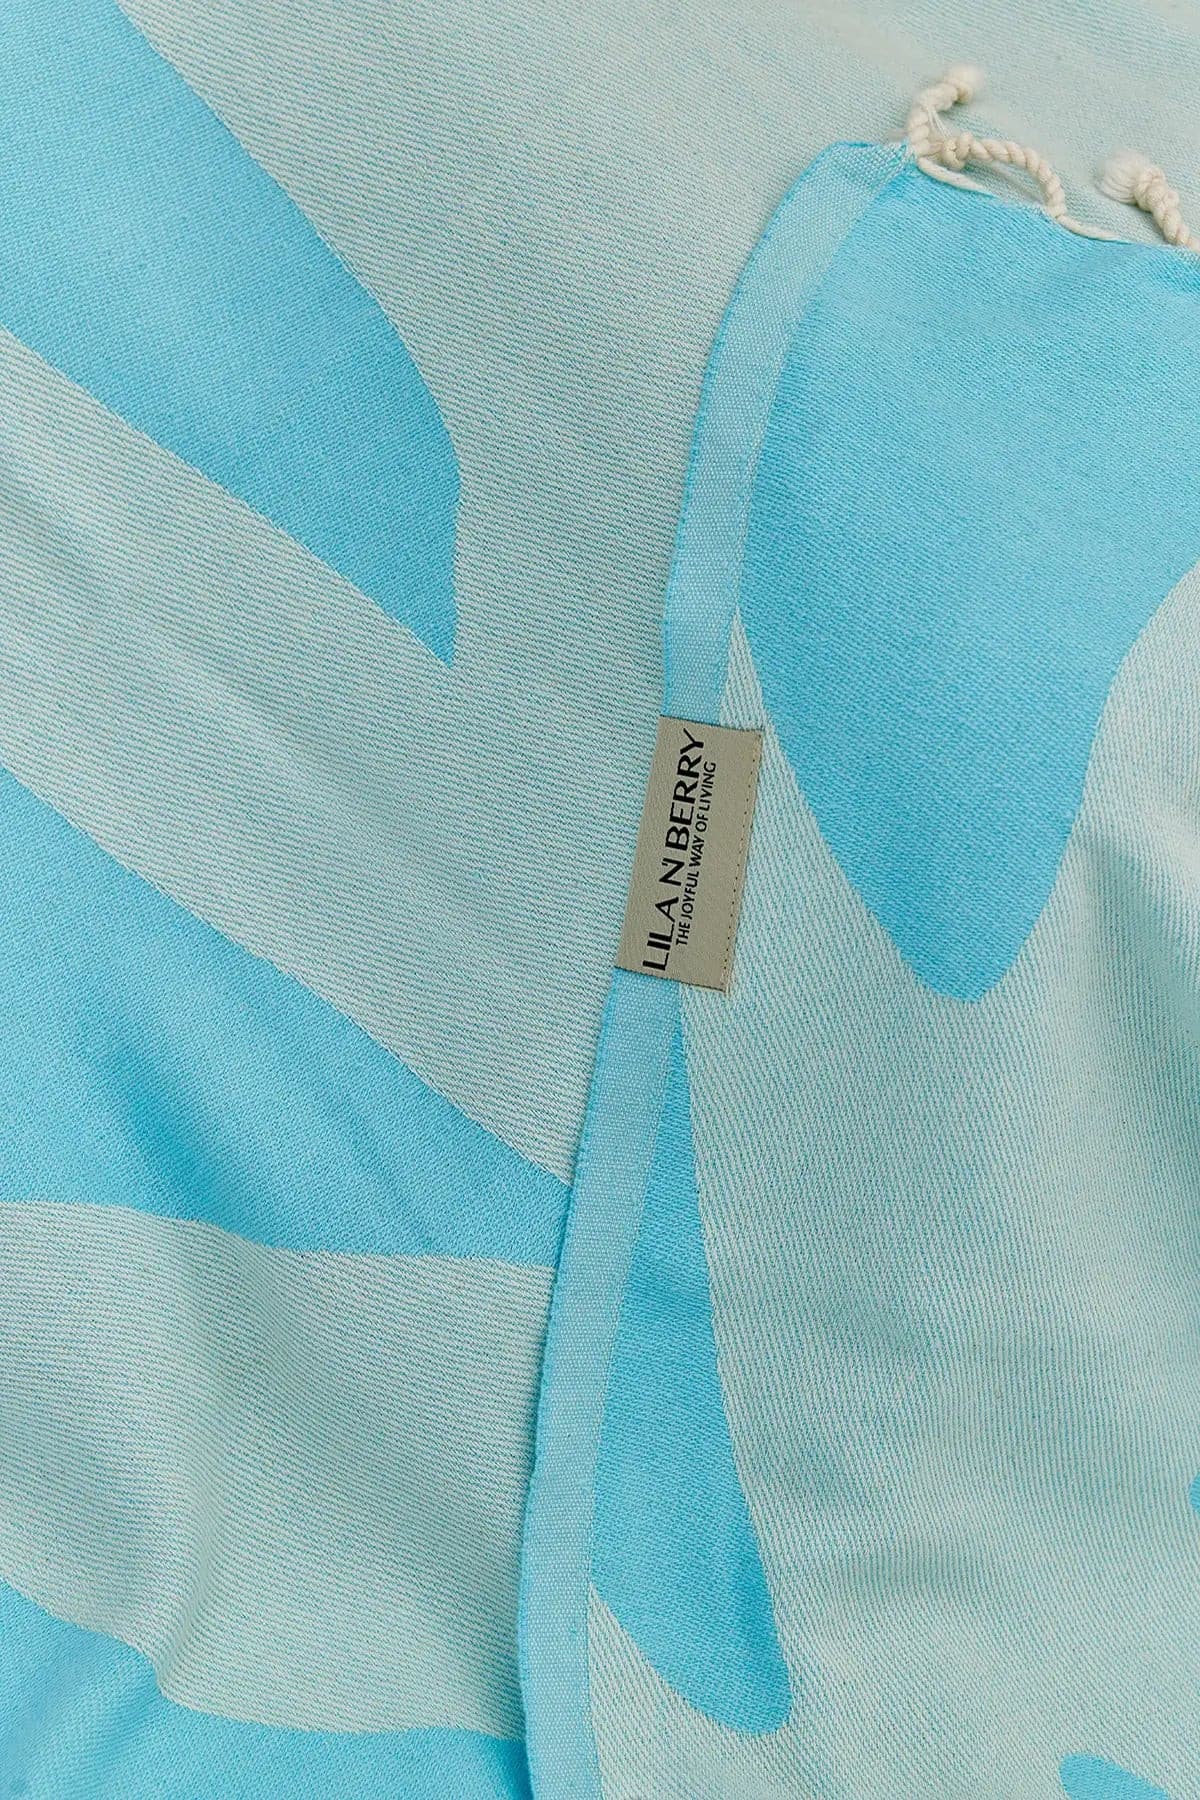 Beach/Bath,living place, Sky Blue,Turkish towel,branded,summer,line patterned,double-faces,purified sand,light,compact, easy pack,fun, recycled,double color,diamond,eastern flare,breeze,tropical forest